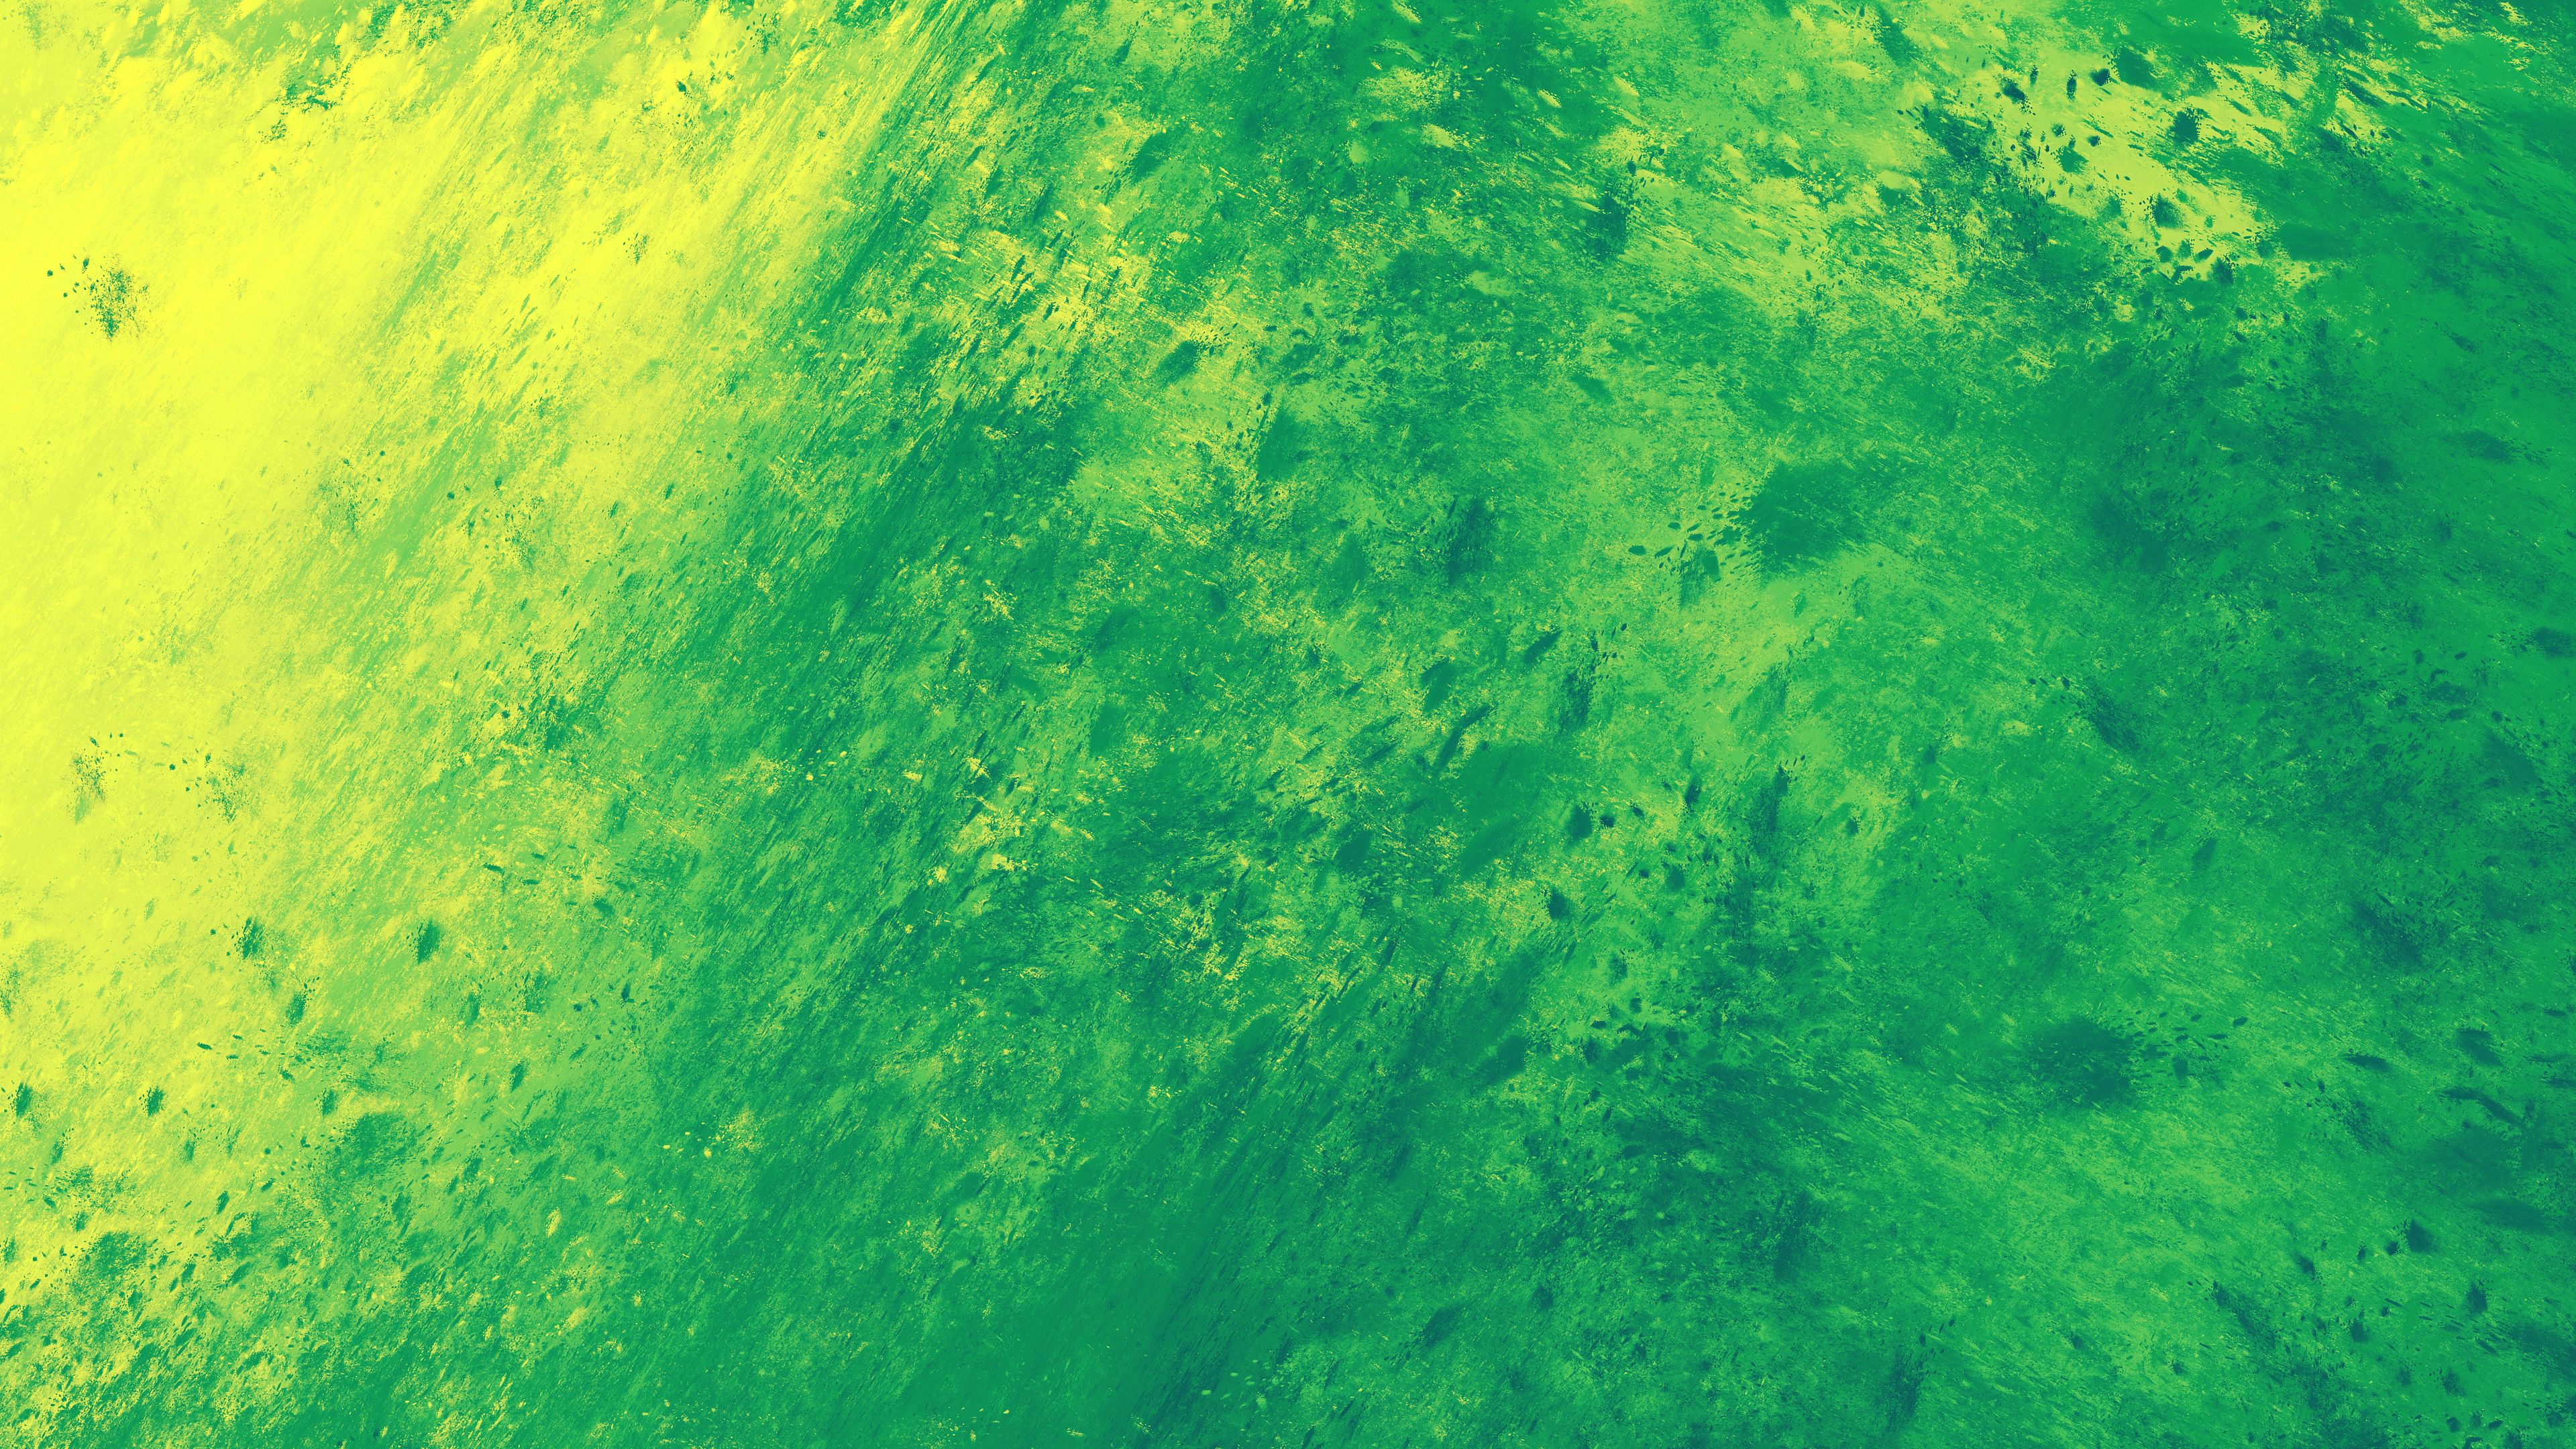 light green, stains, spots, green, abstract, yellow, salad